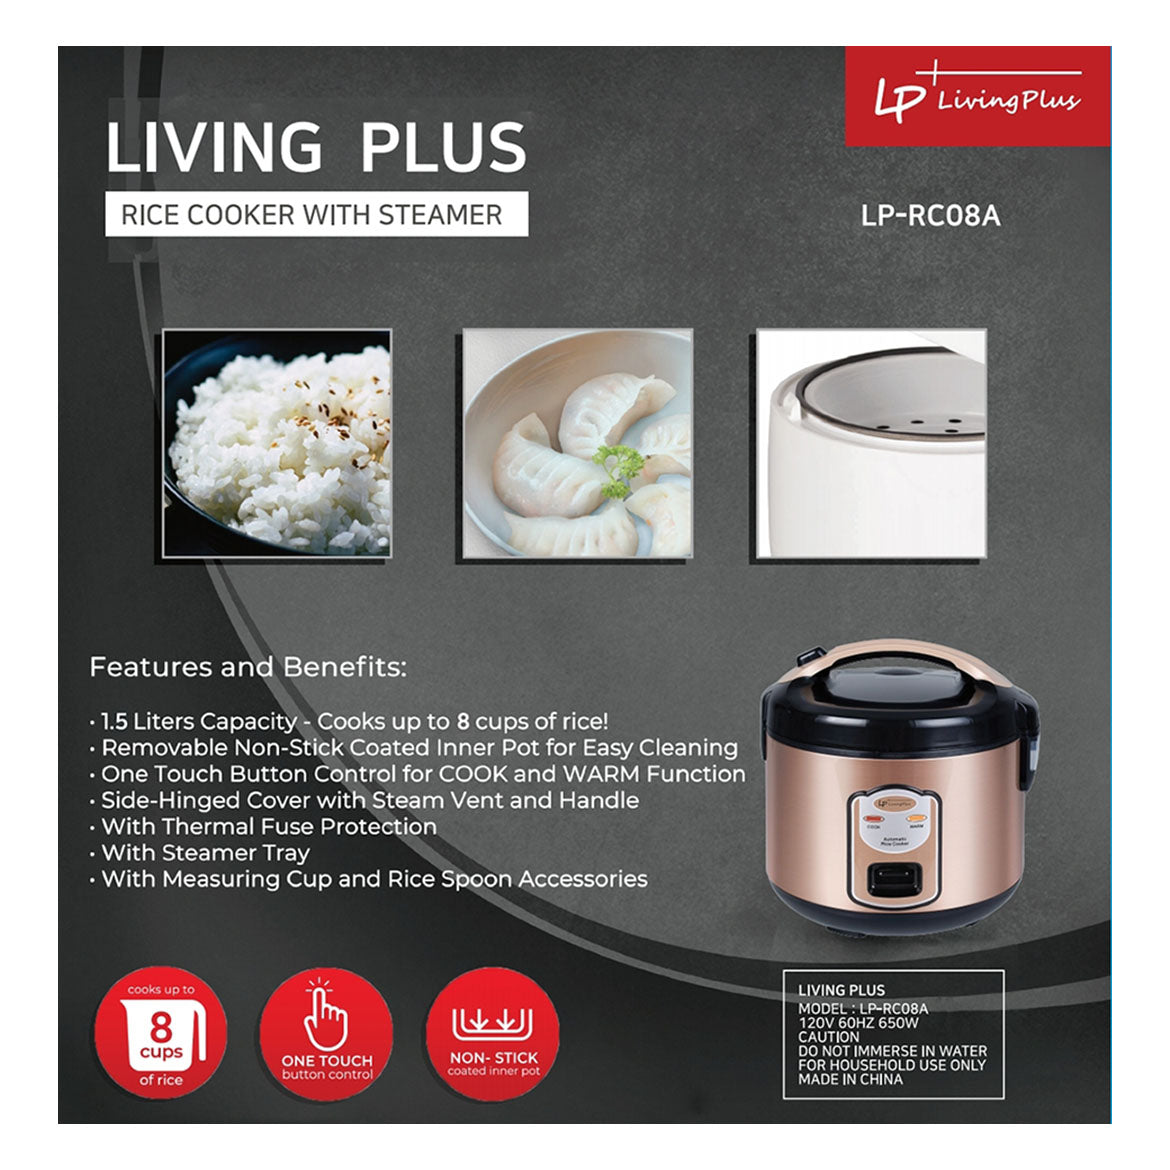 LP LIVING PLUS Electric Rice Cooker, Non stick, One Touch Button, with Steamer Tray, Measuring Cup and Rice Spoon (1.5L)